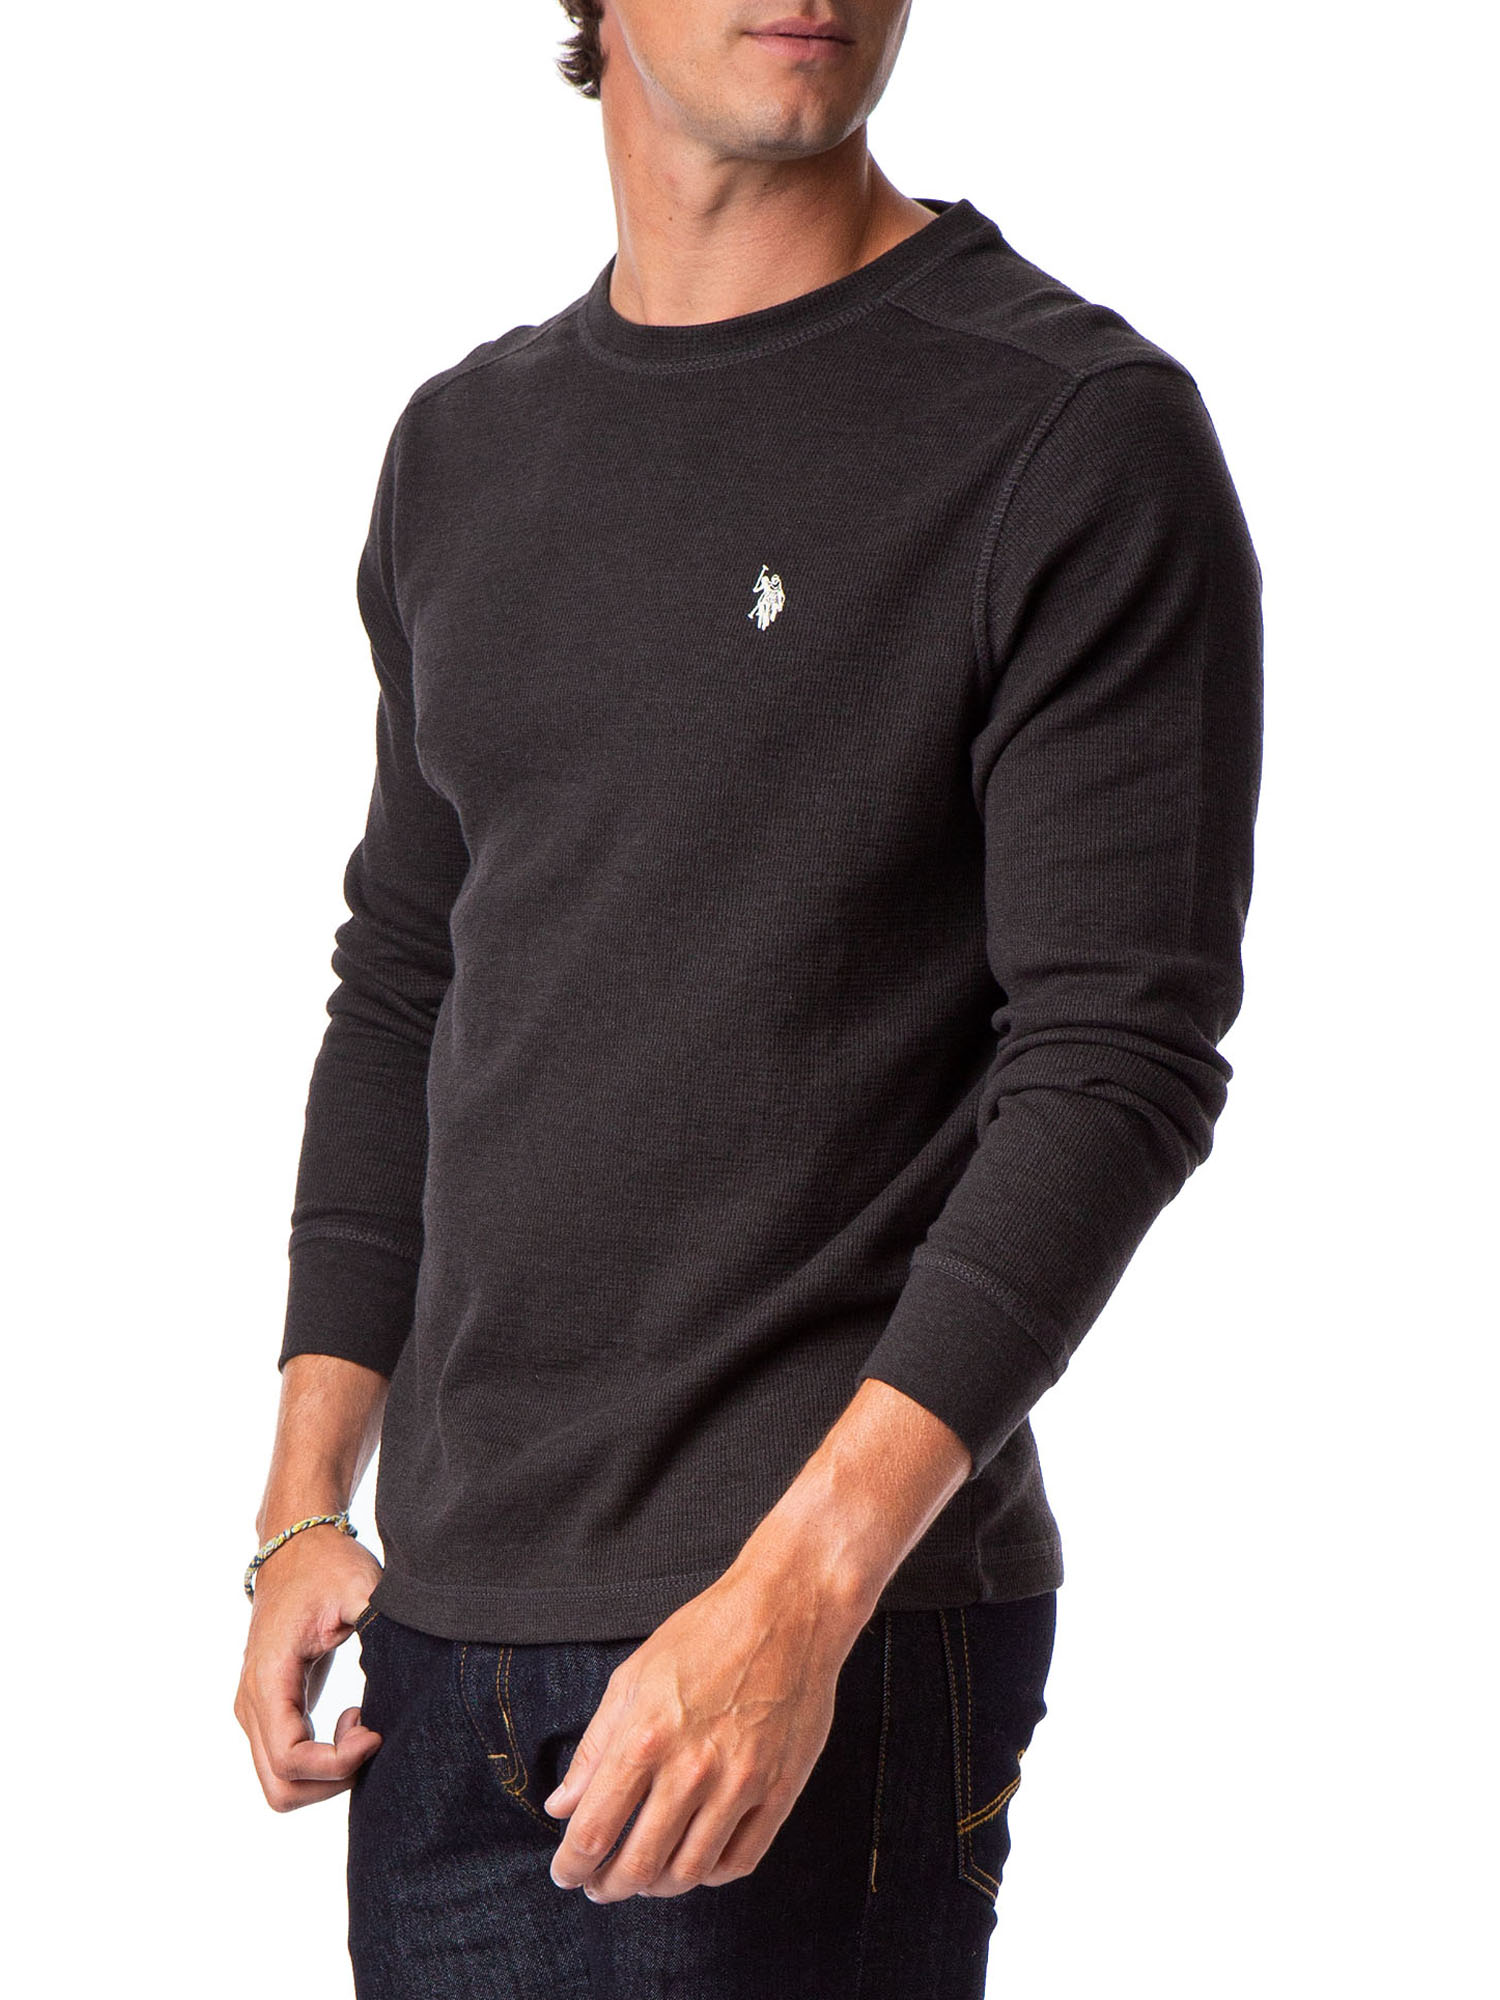 U.S. Polo Assn. Men's Knit Thermal T-Shirt - image 1 of 2